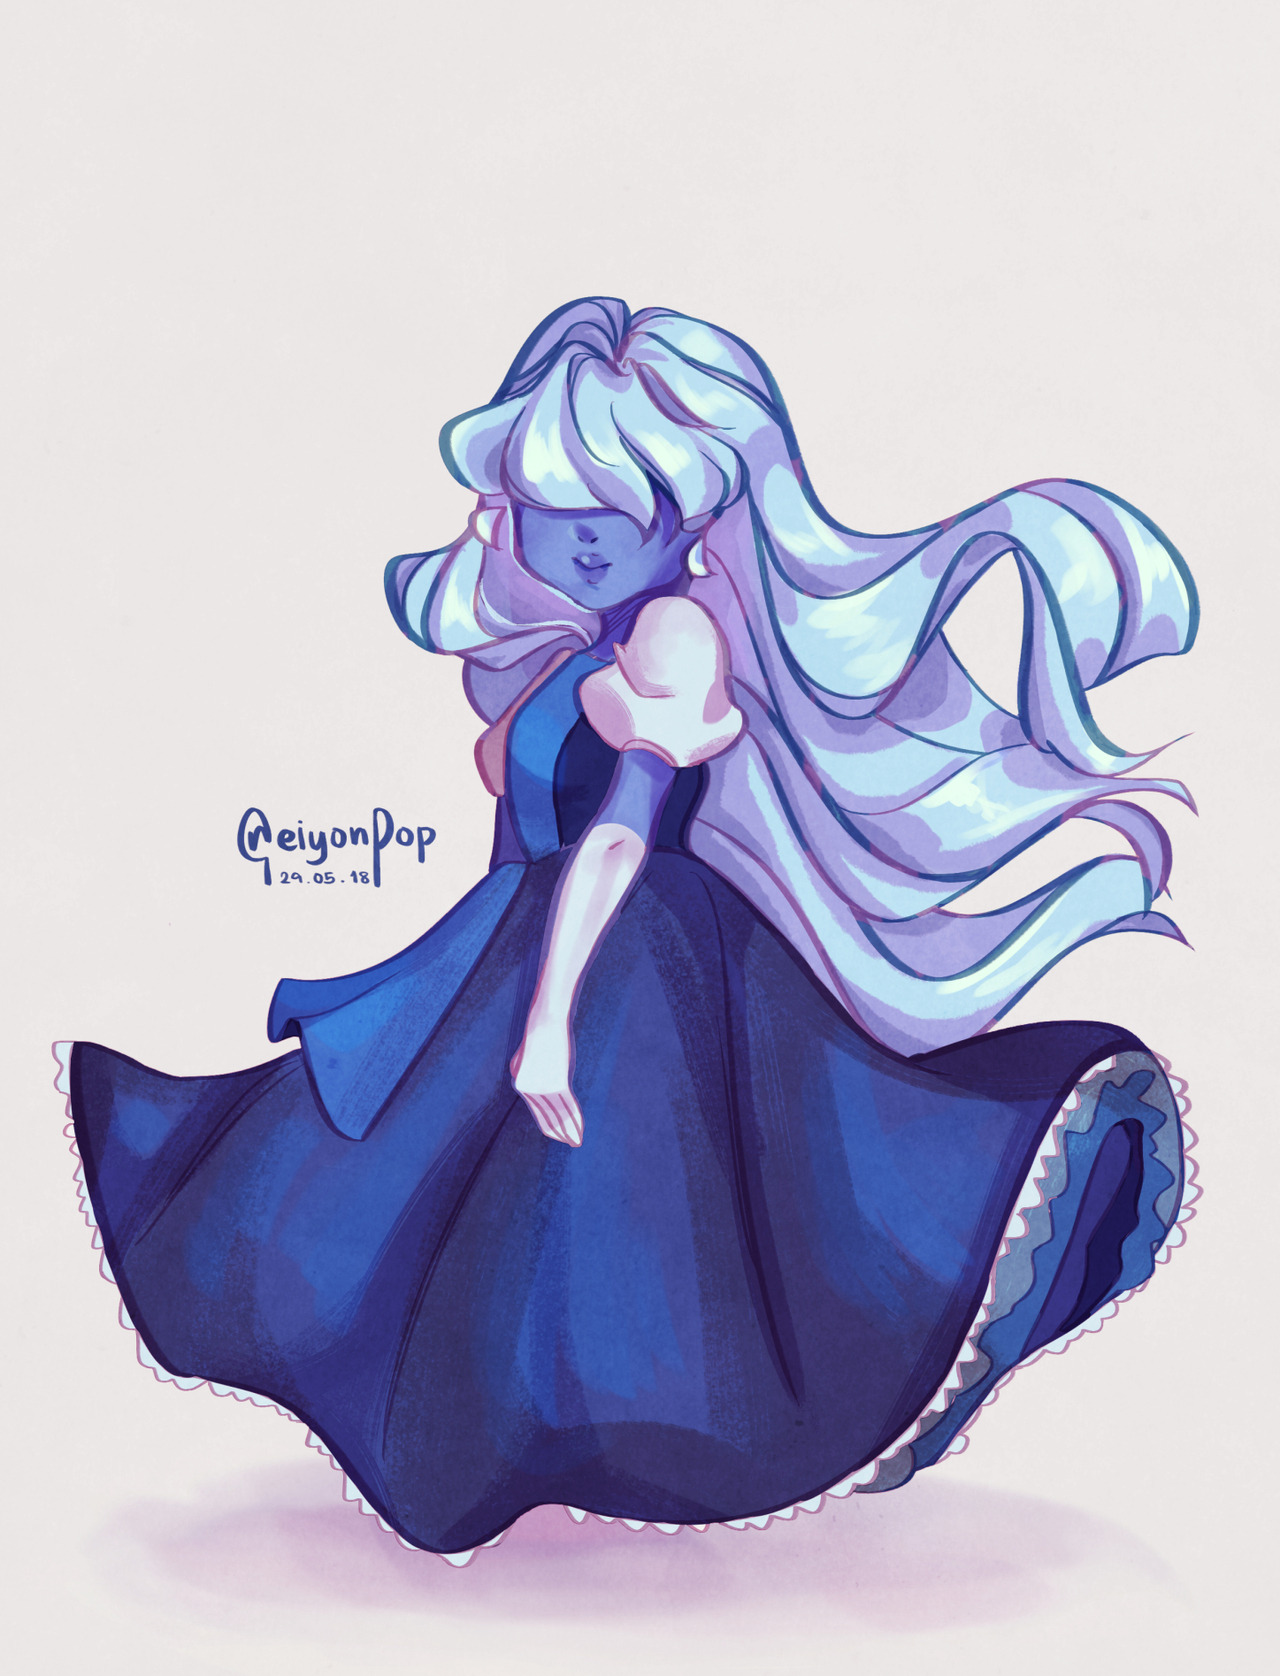 I tried a slightly different style with sapphire. If you wanna try colouring the lineart, send me a message so I can give you a higher res one •v•